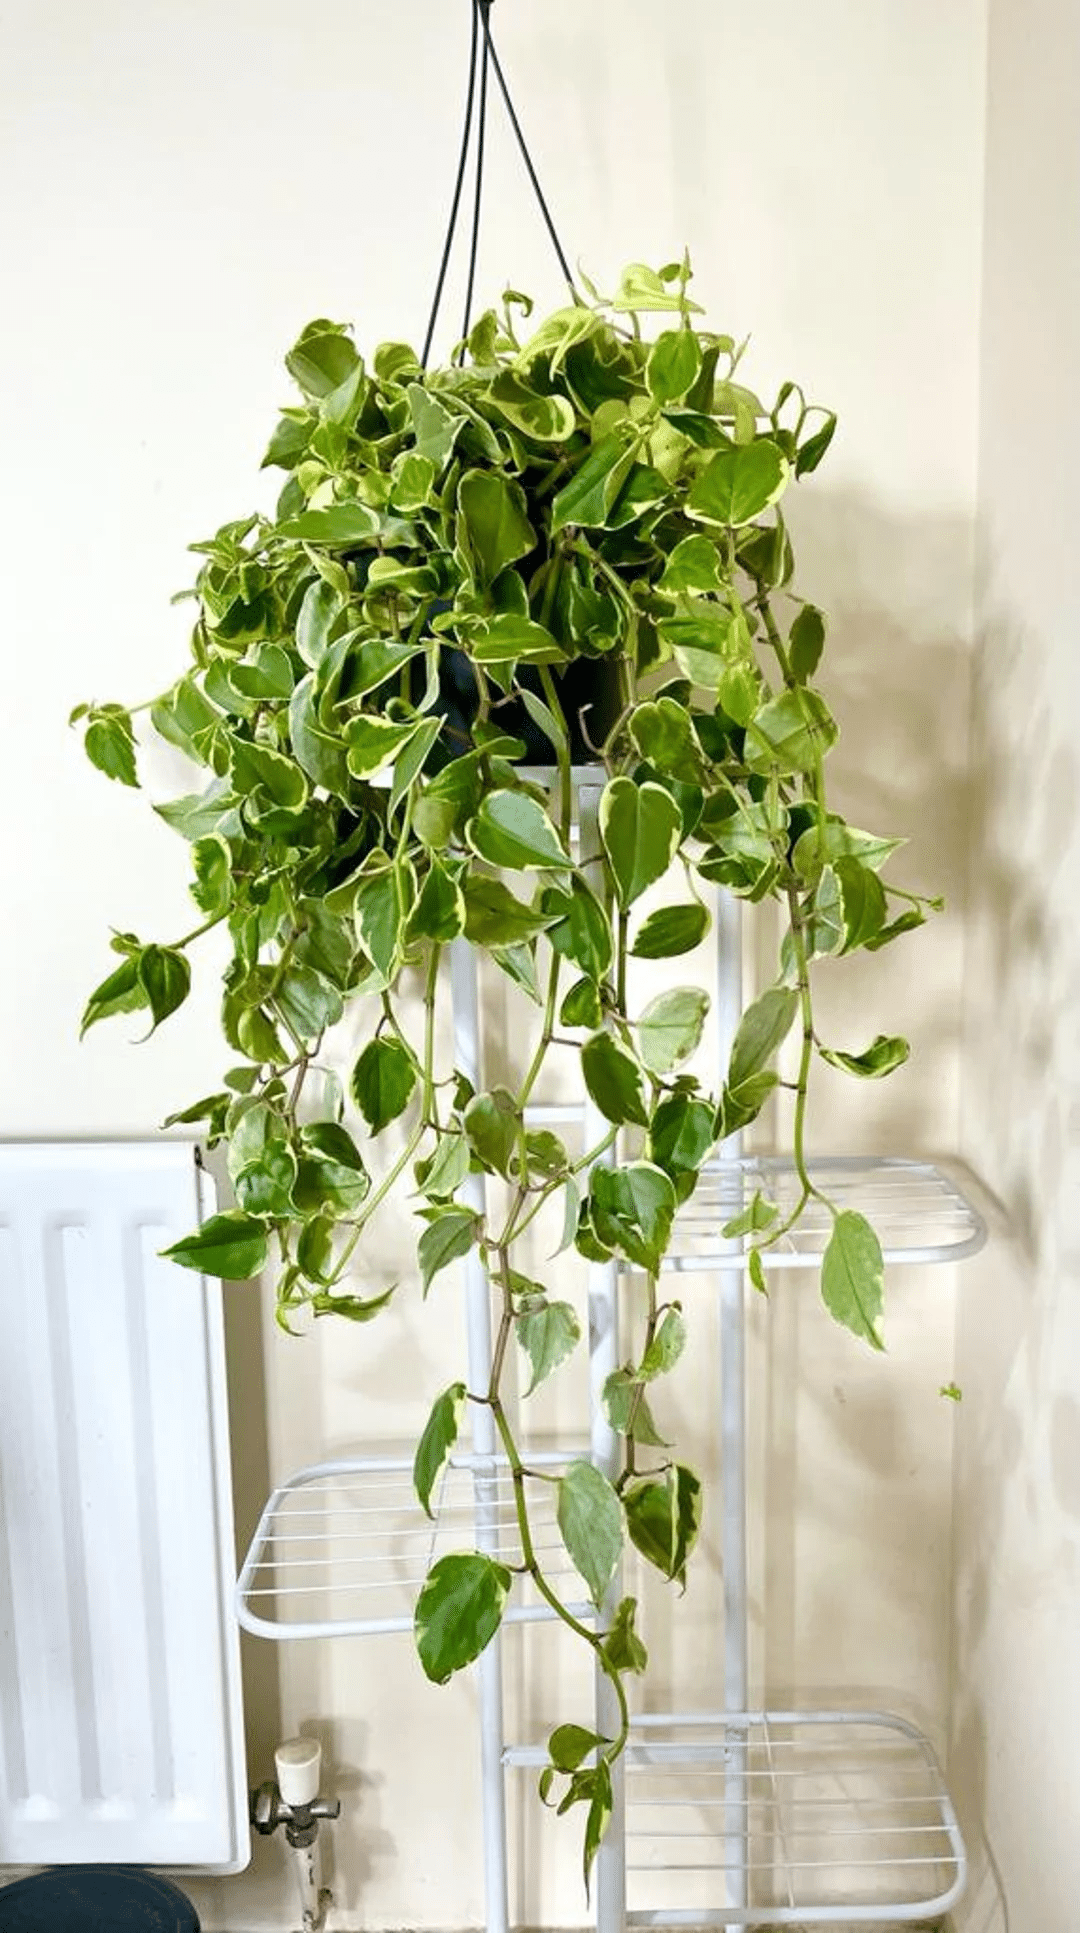 A peperomia scandens plant with trailing peperomia plant leaves in hanging basket